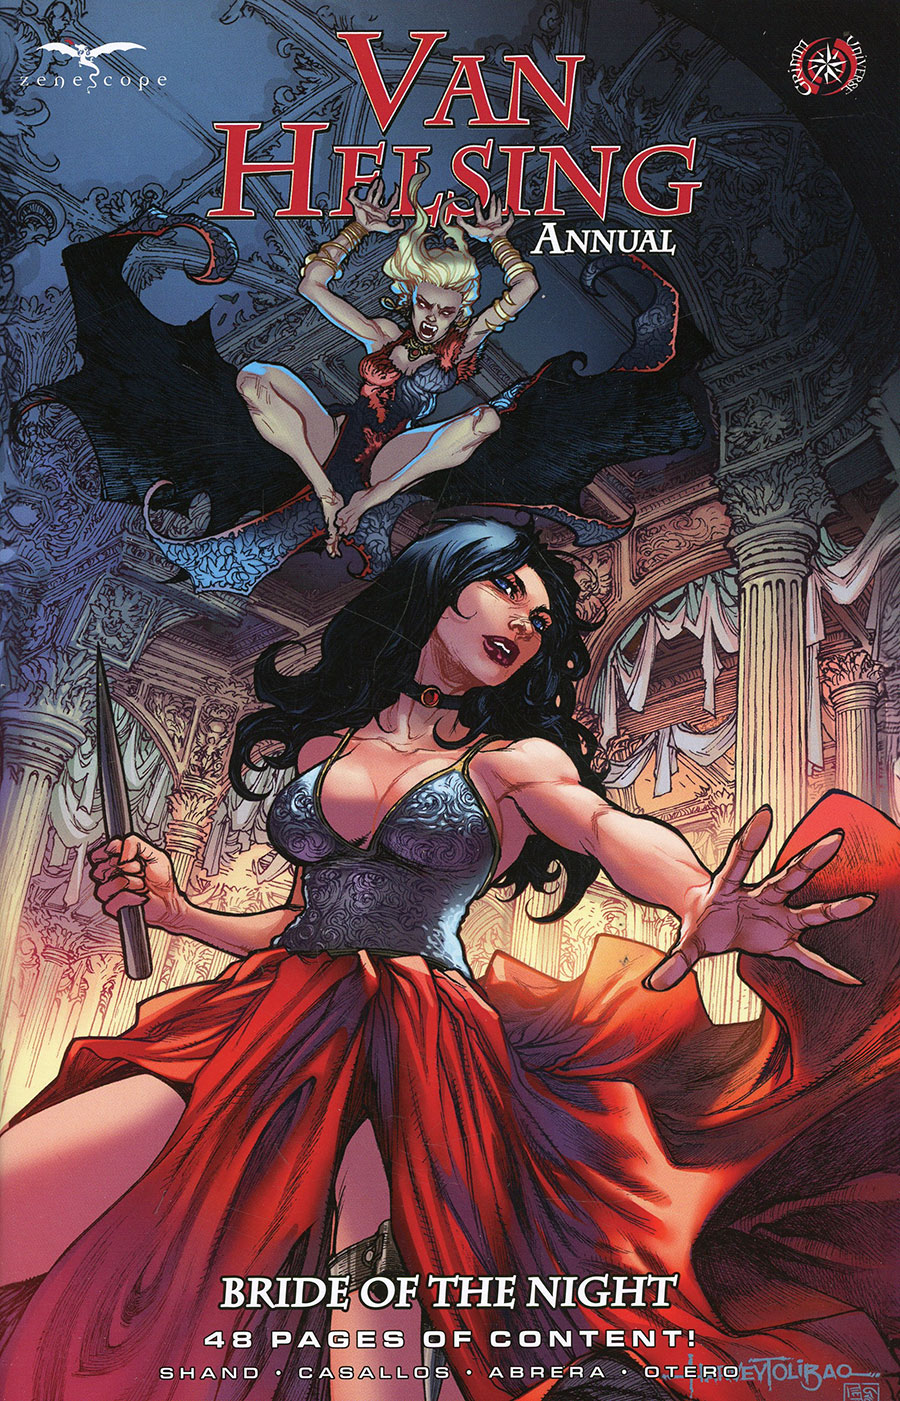 Grimm Fairy Tales Presents Van Helsing Annual Bride Of The Night #1 (One Shot) Cover B Harvey Tolibao